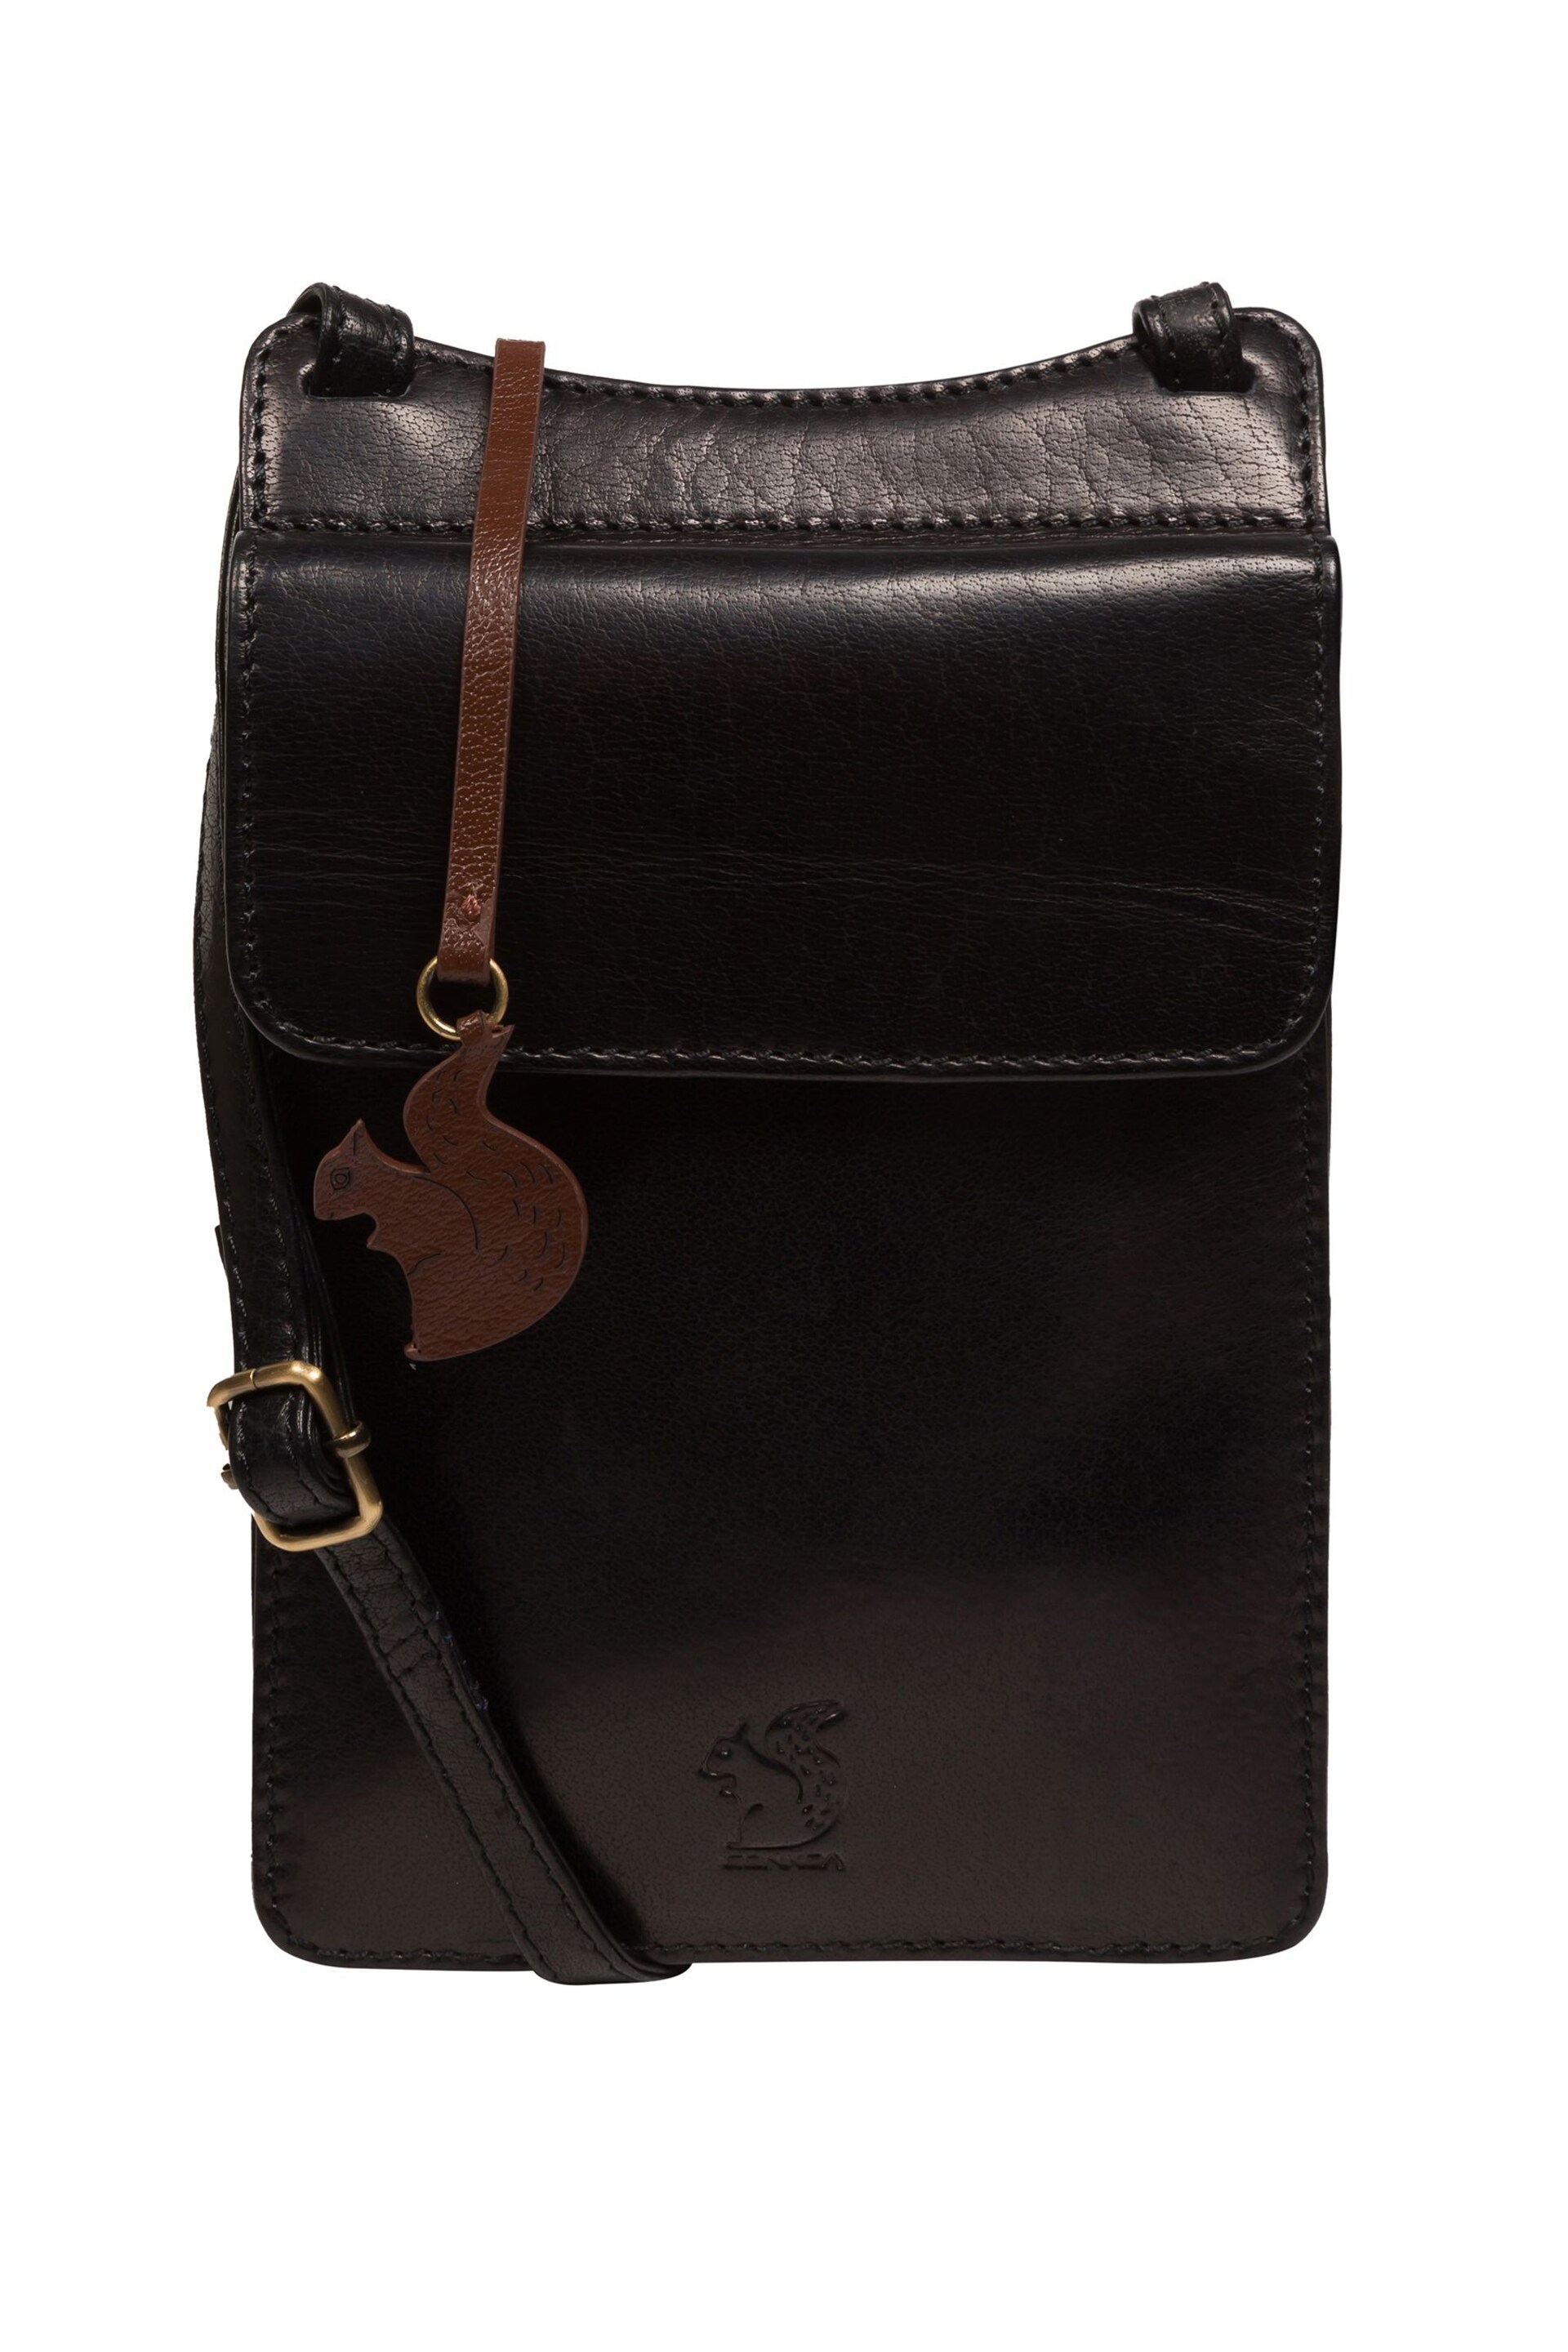 Conkca 'Milly' Leather Cross-Body Phone Black Bag - Image 3 of 6